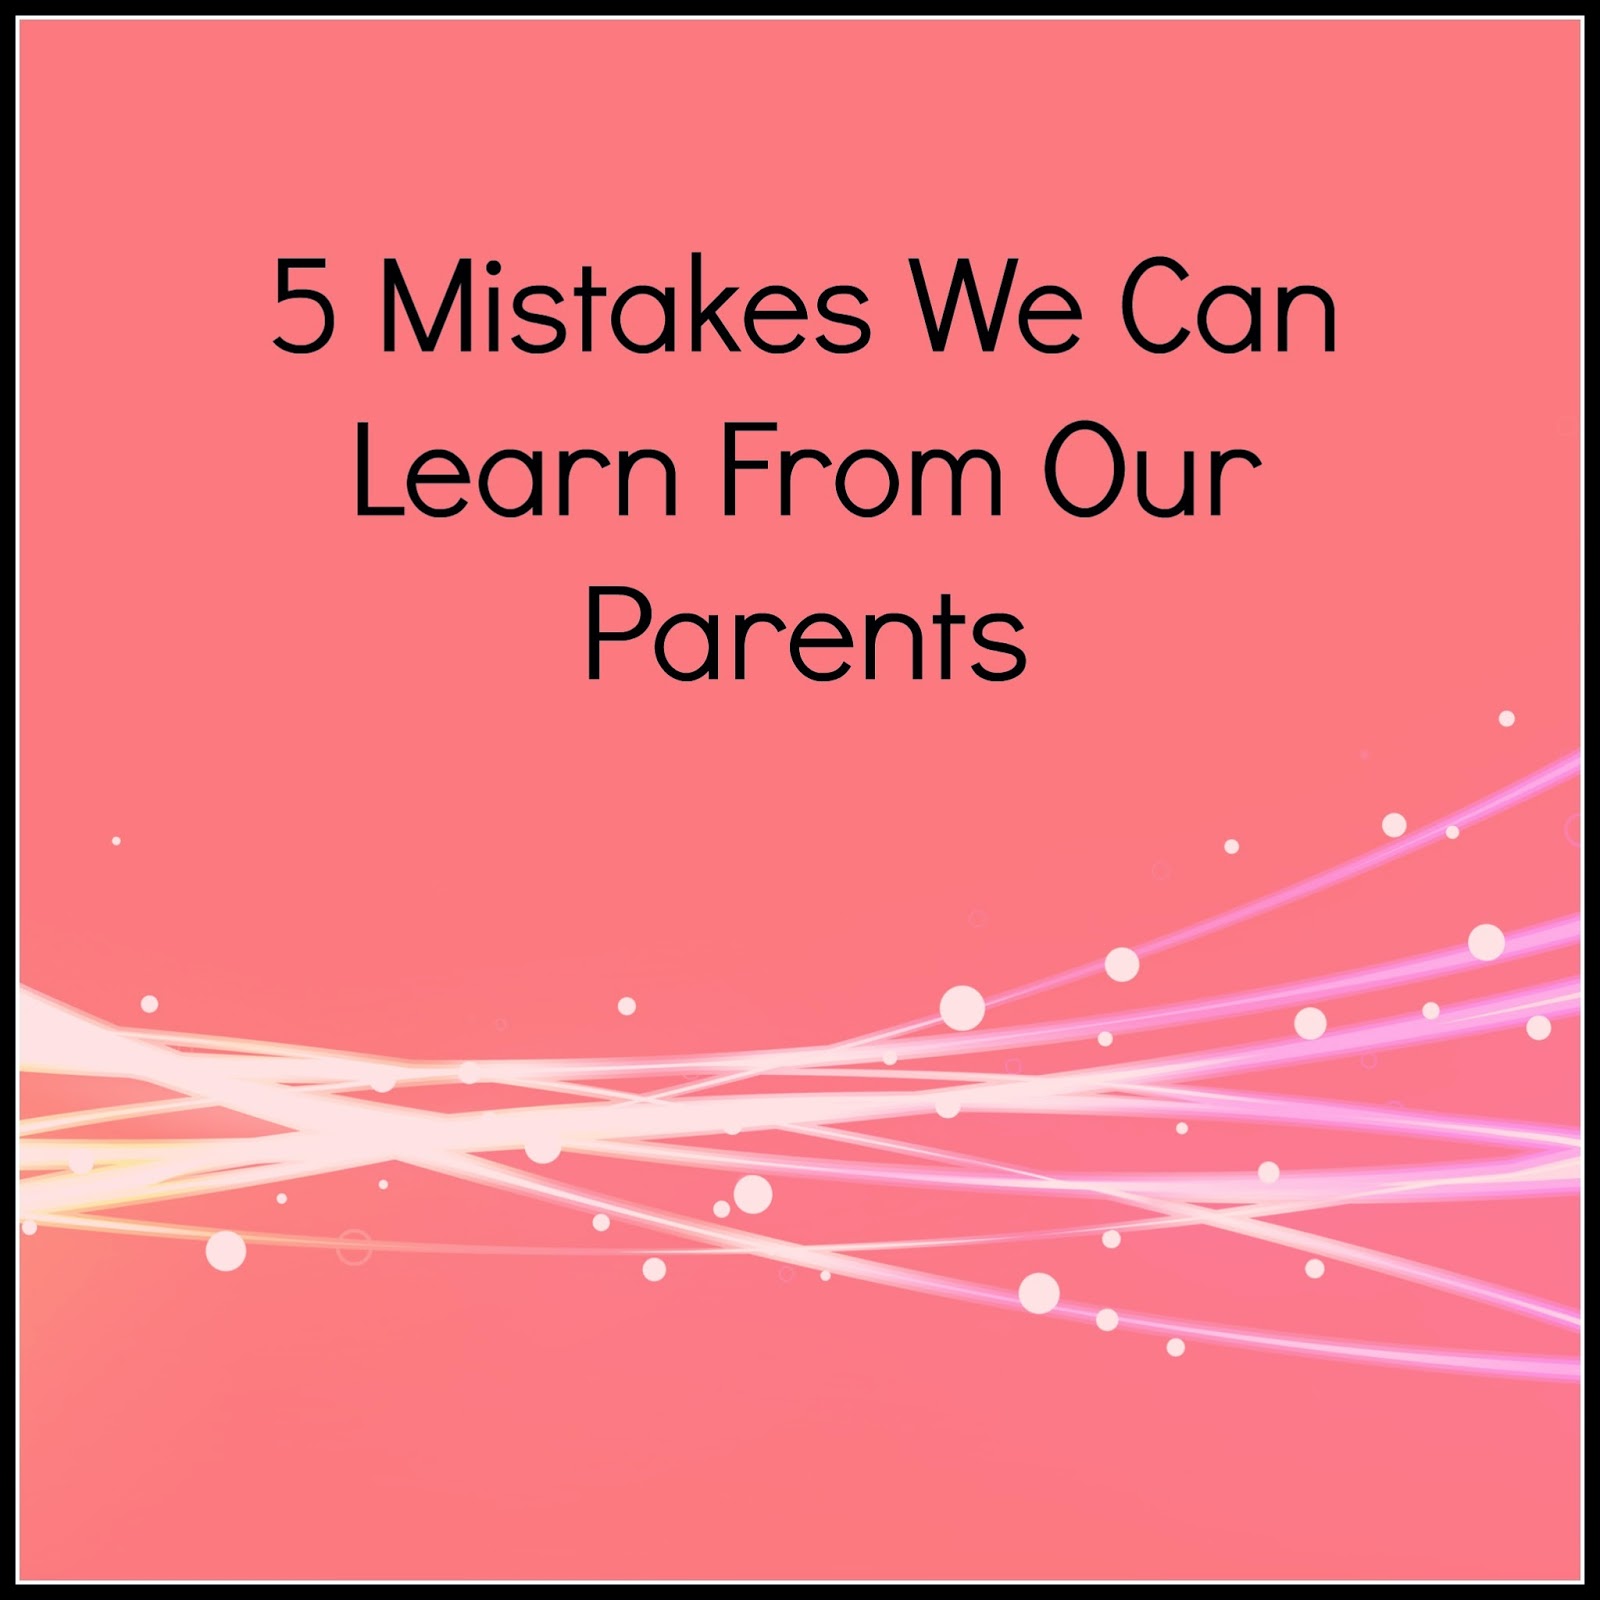 advice, life lessons, things we can learn from our parents